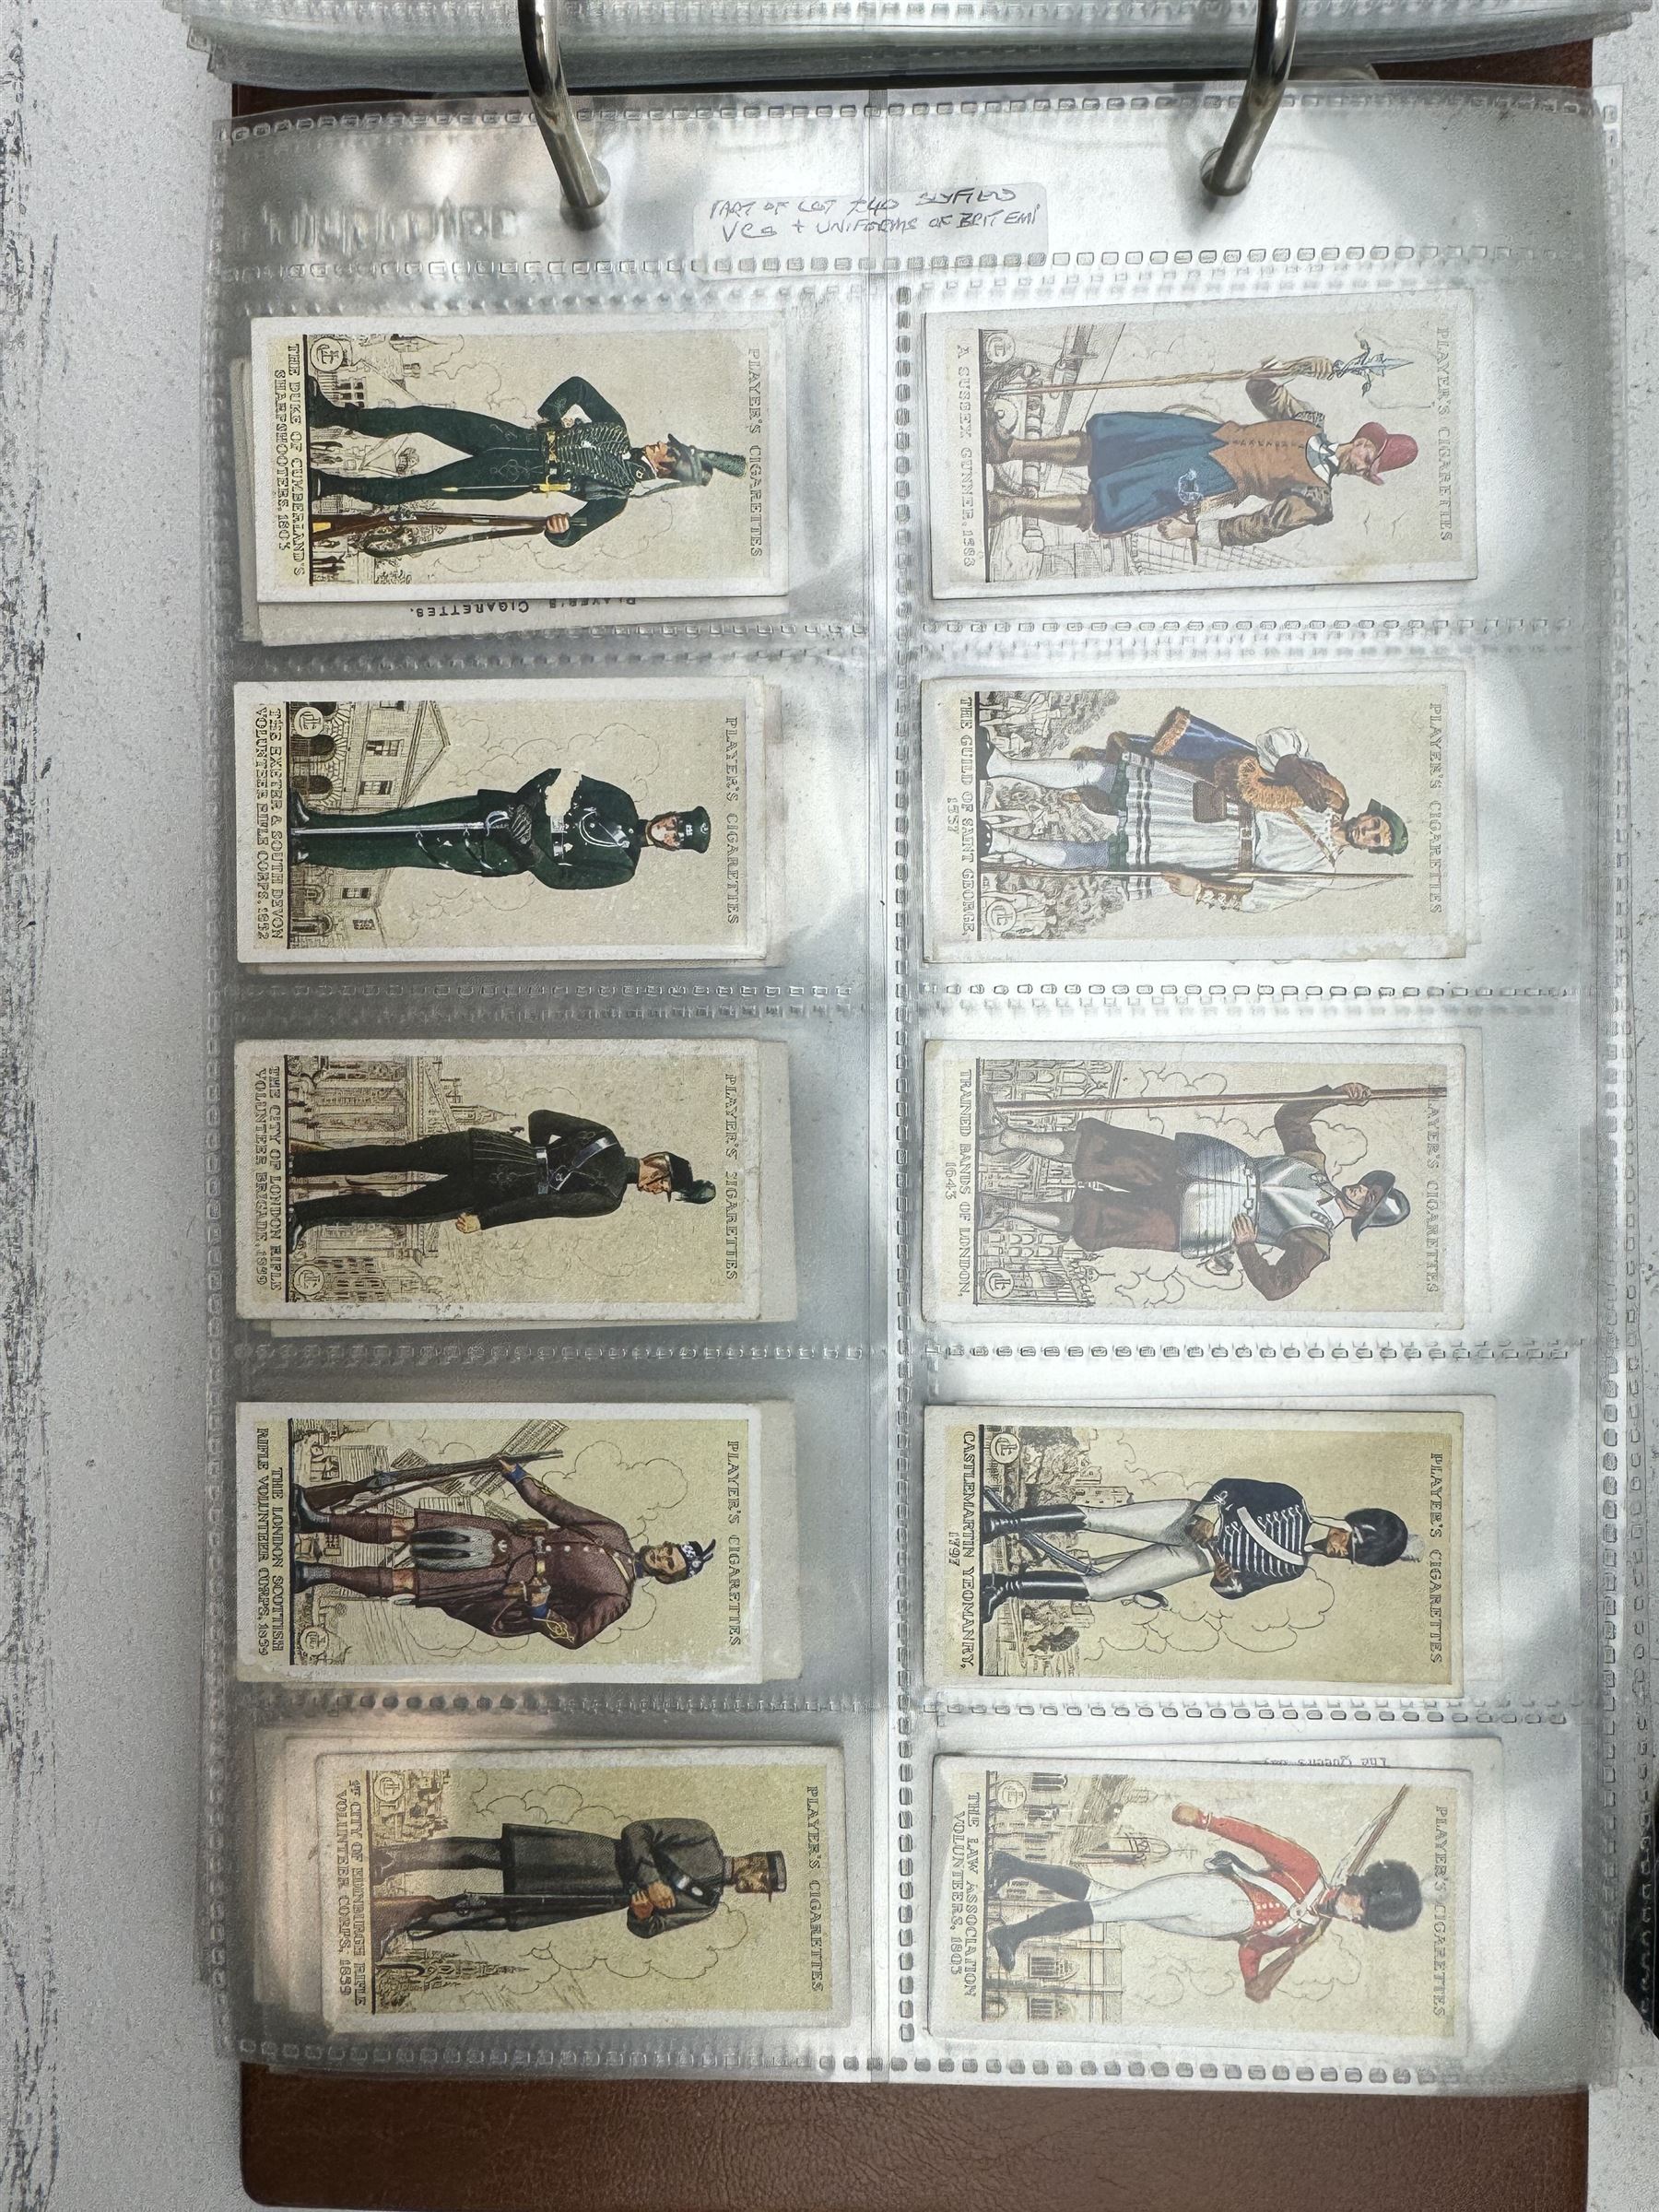 Album of Players militaria related cigarette cards - Image 4 of 5